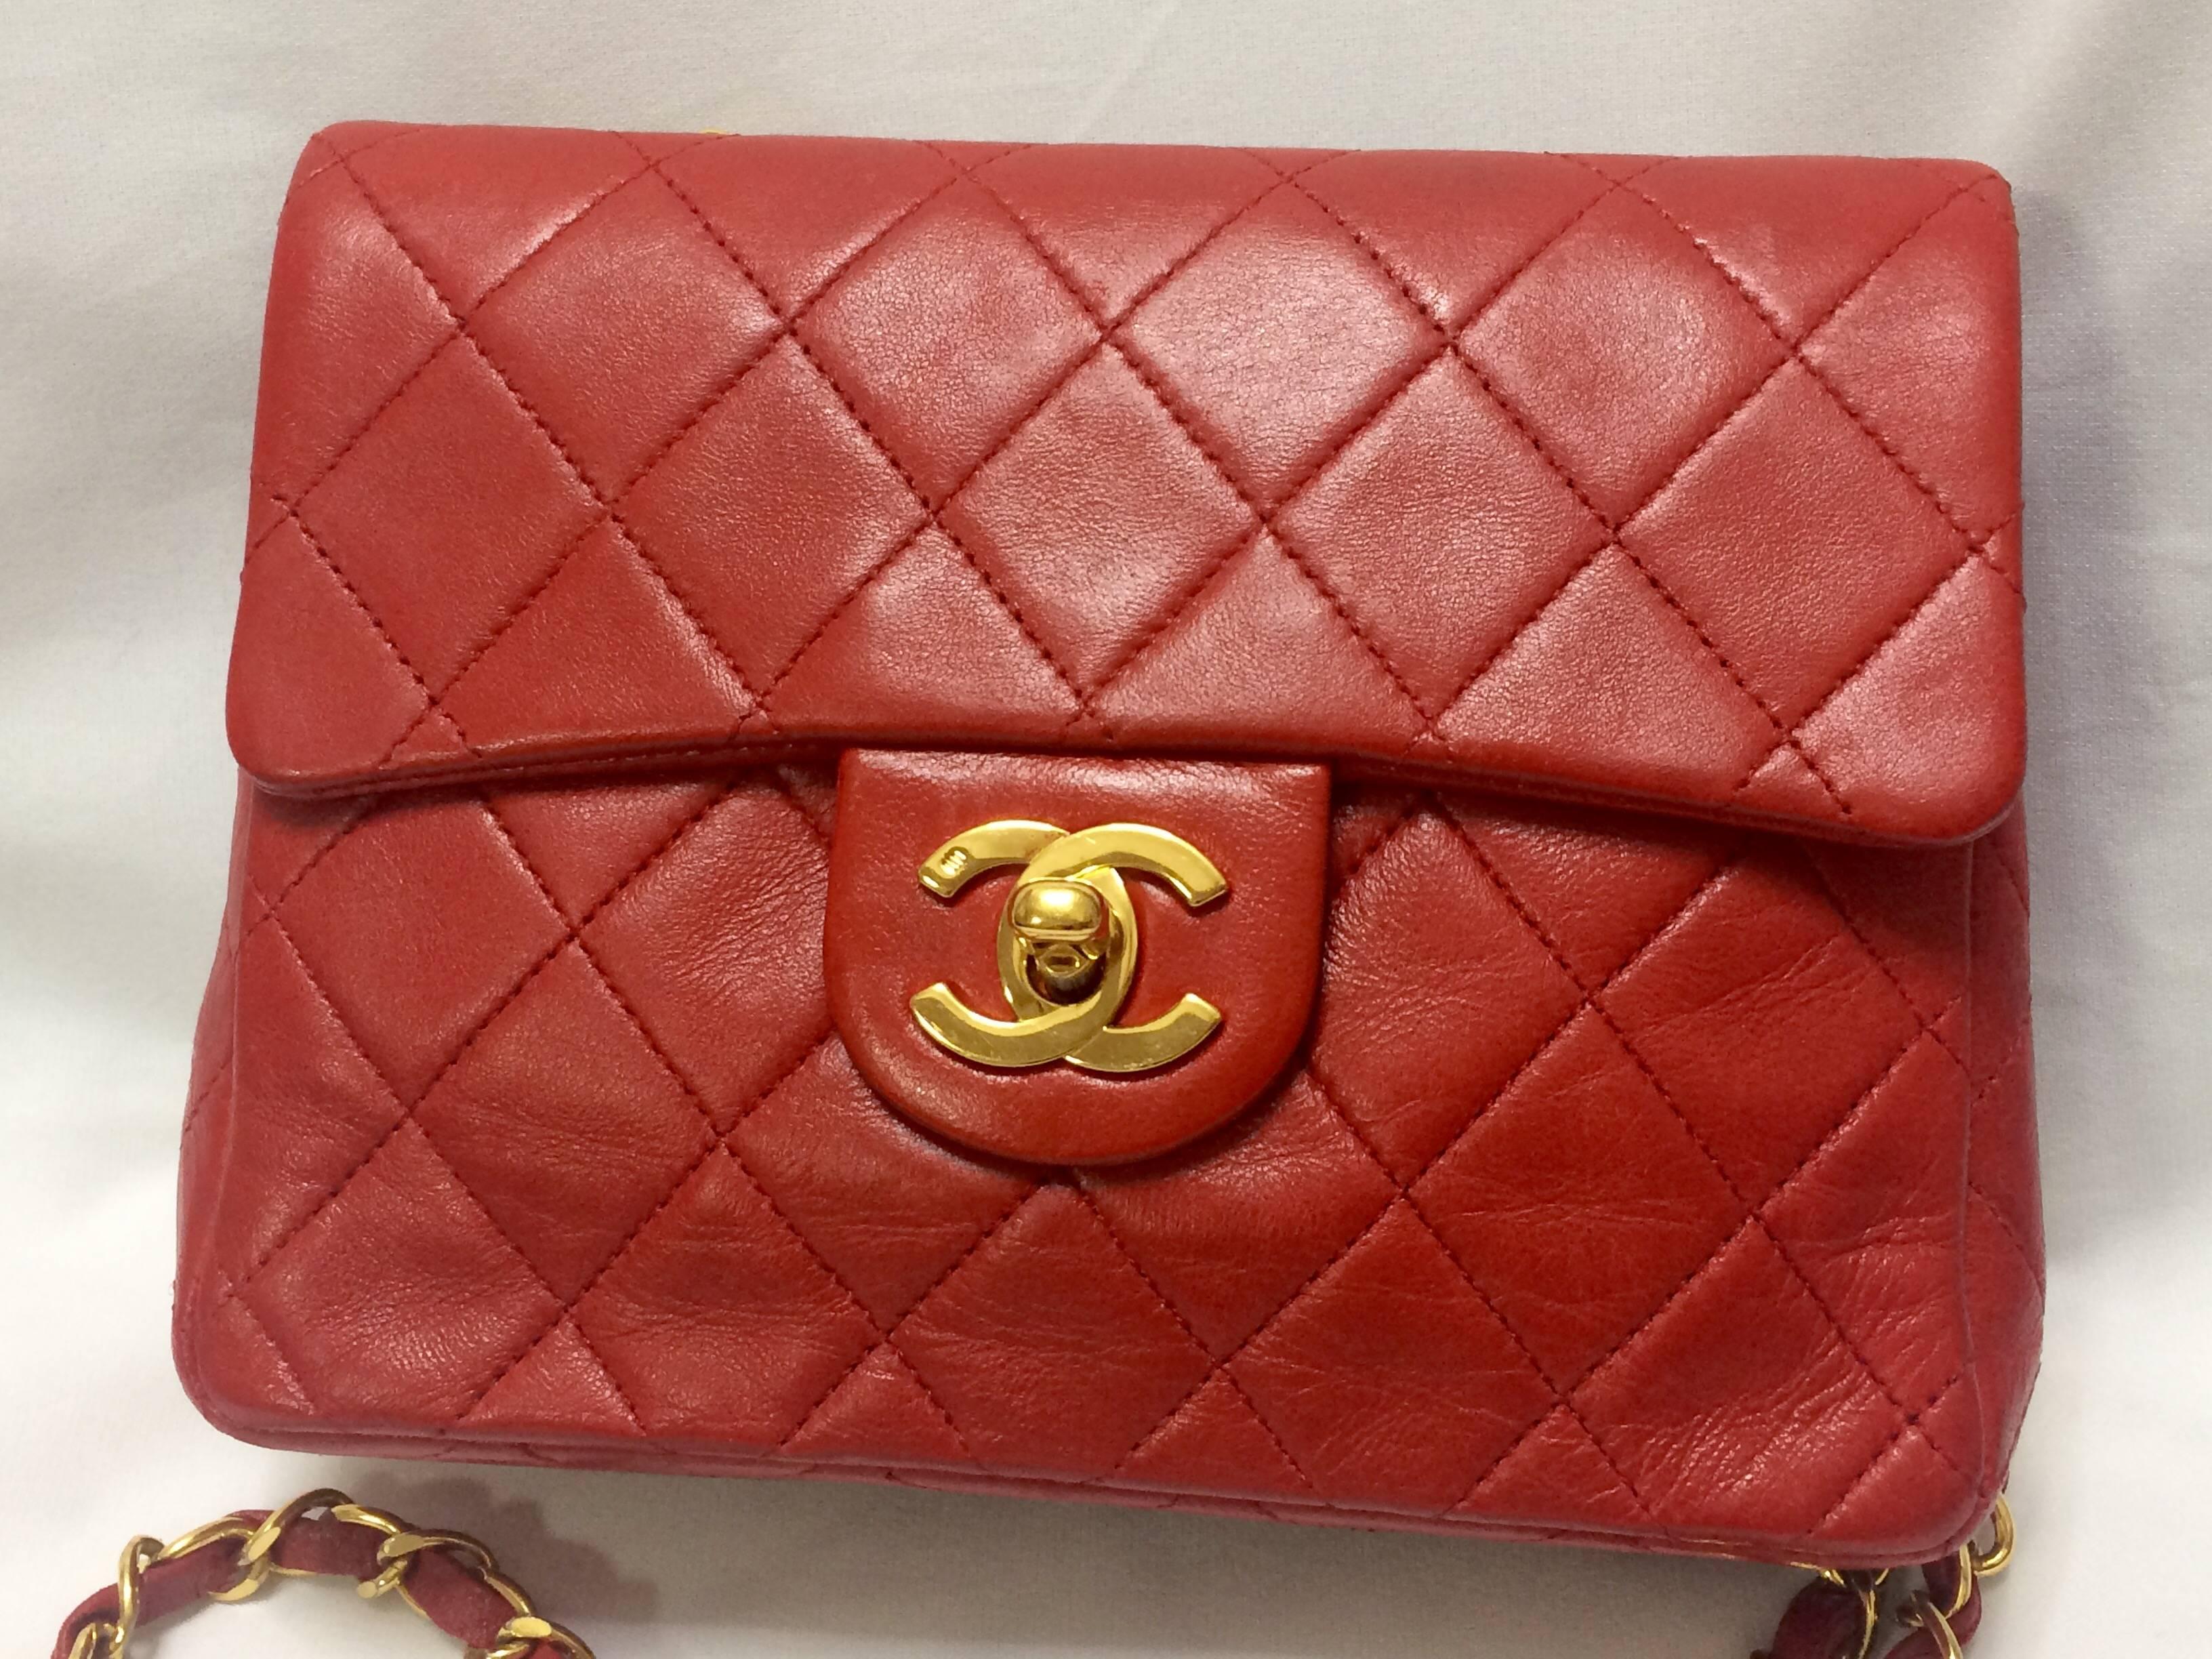 Vintage CHANEL lipstick red lambskin purse with golden CC and chain strap. Classic mini 2.55 Chanel red bag back in the era.

This is a CHANEL vintage lambskin purse in lipstick red approx from late 80s to early 90s. 
Great piece to be one of